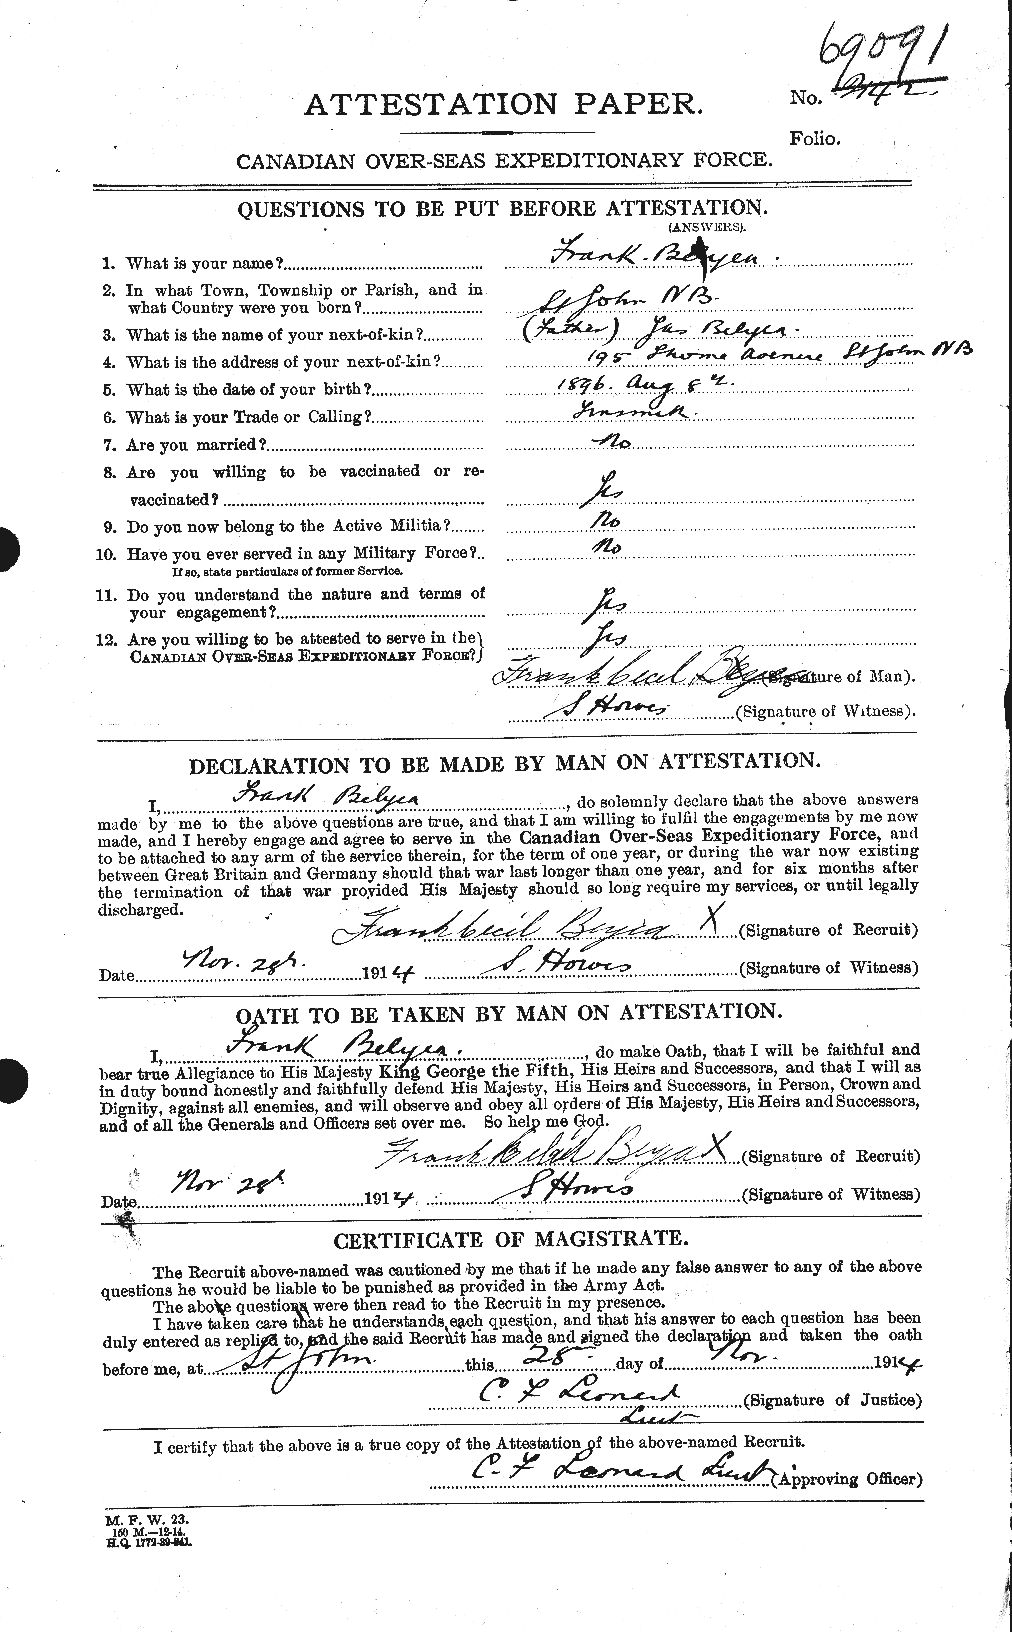 Personnel Records of the First World War - CEF 237502a